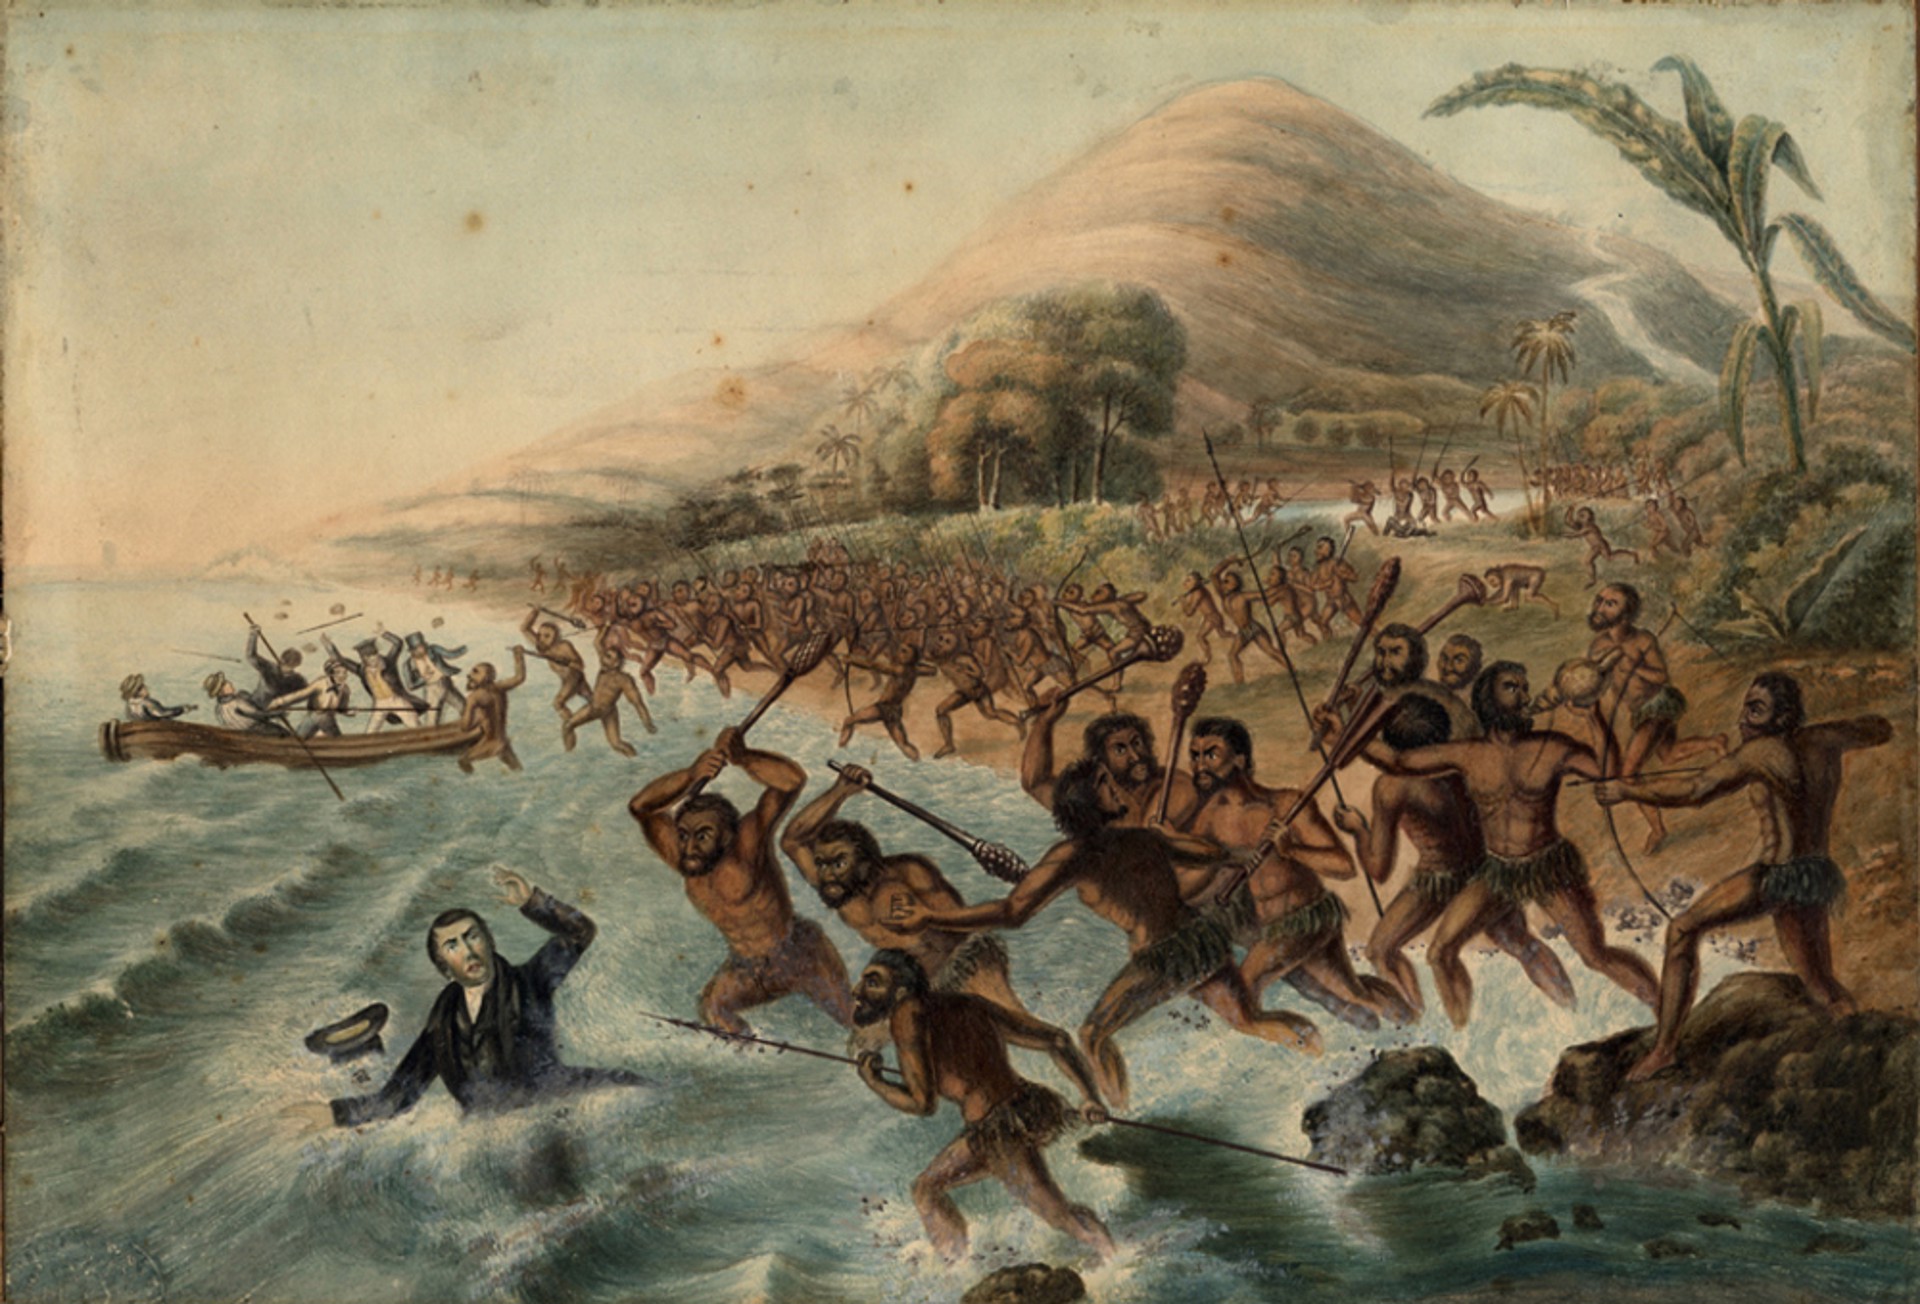 The Massacre of the Reverend J. Williams at Erromanga  in the South Seas by George Baxter